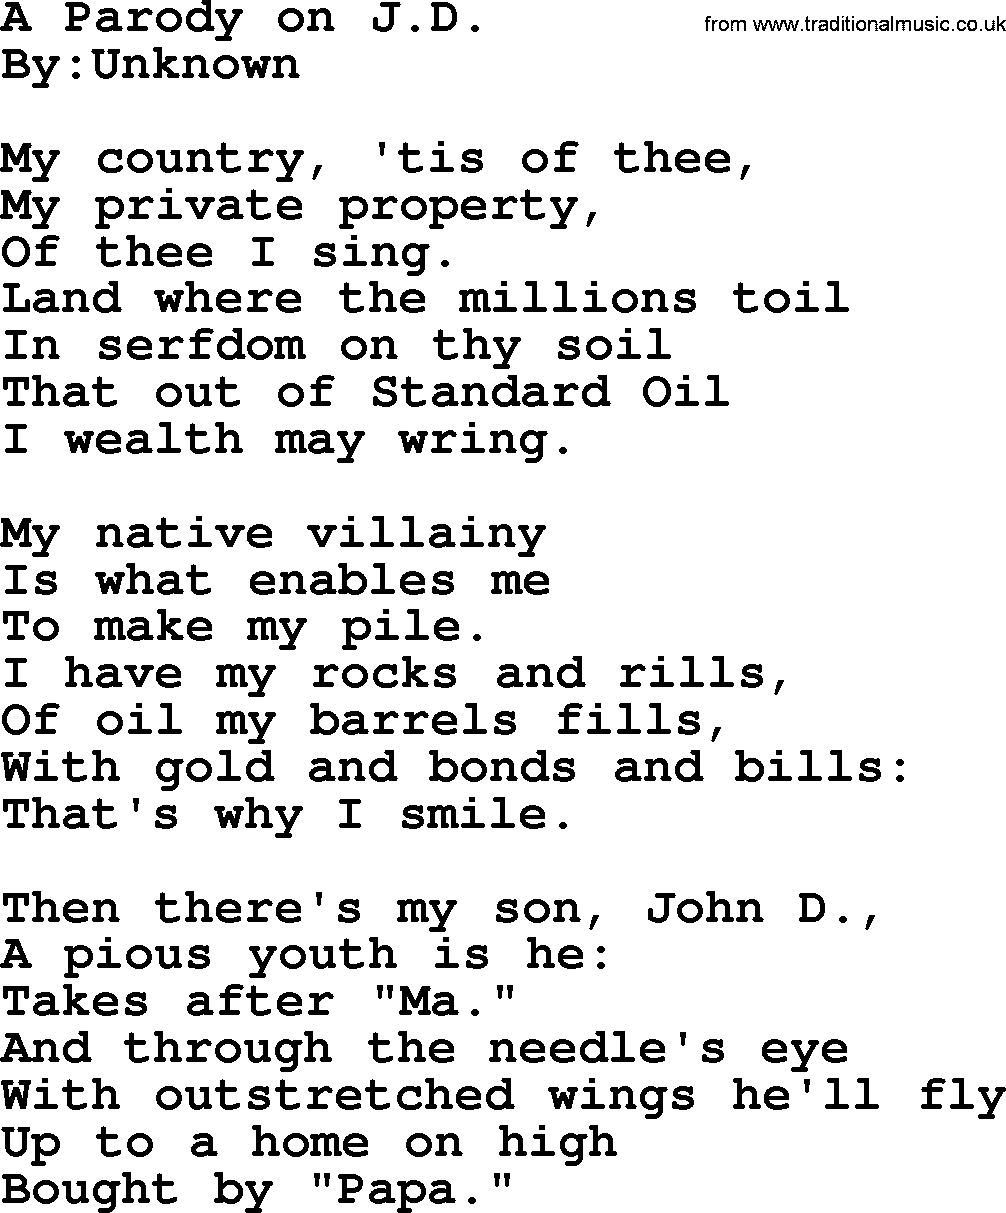 Political, Solidarity, Workers or Union song: A Parody On Jd, lyrics